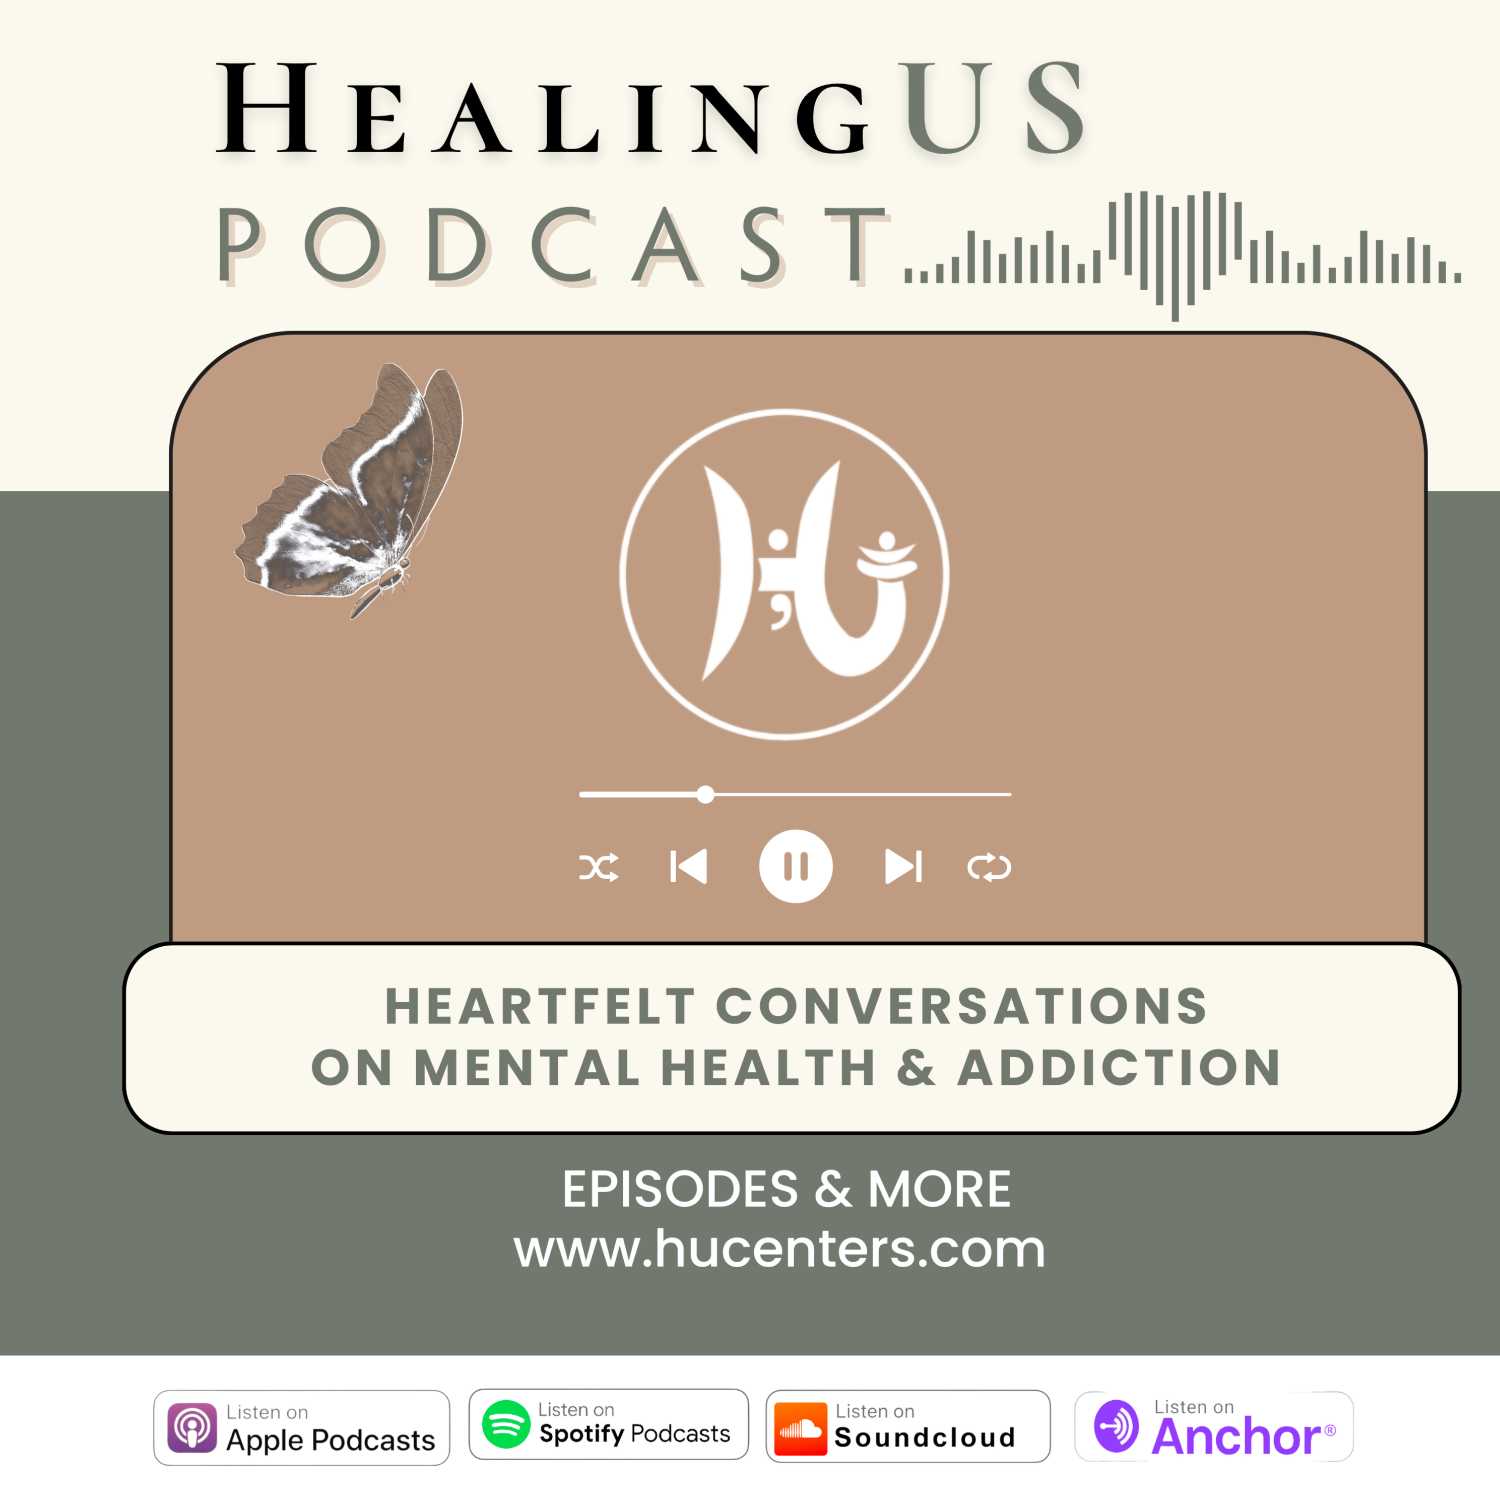 Healing Us Podcast